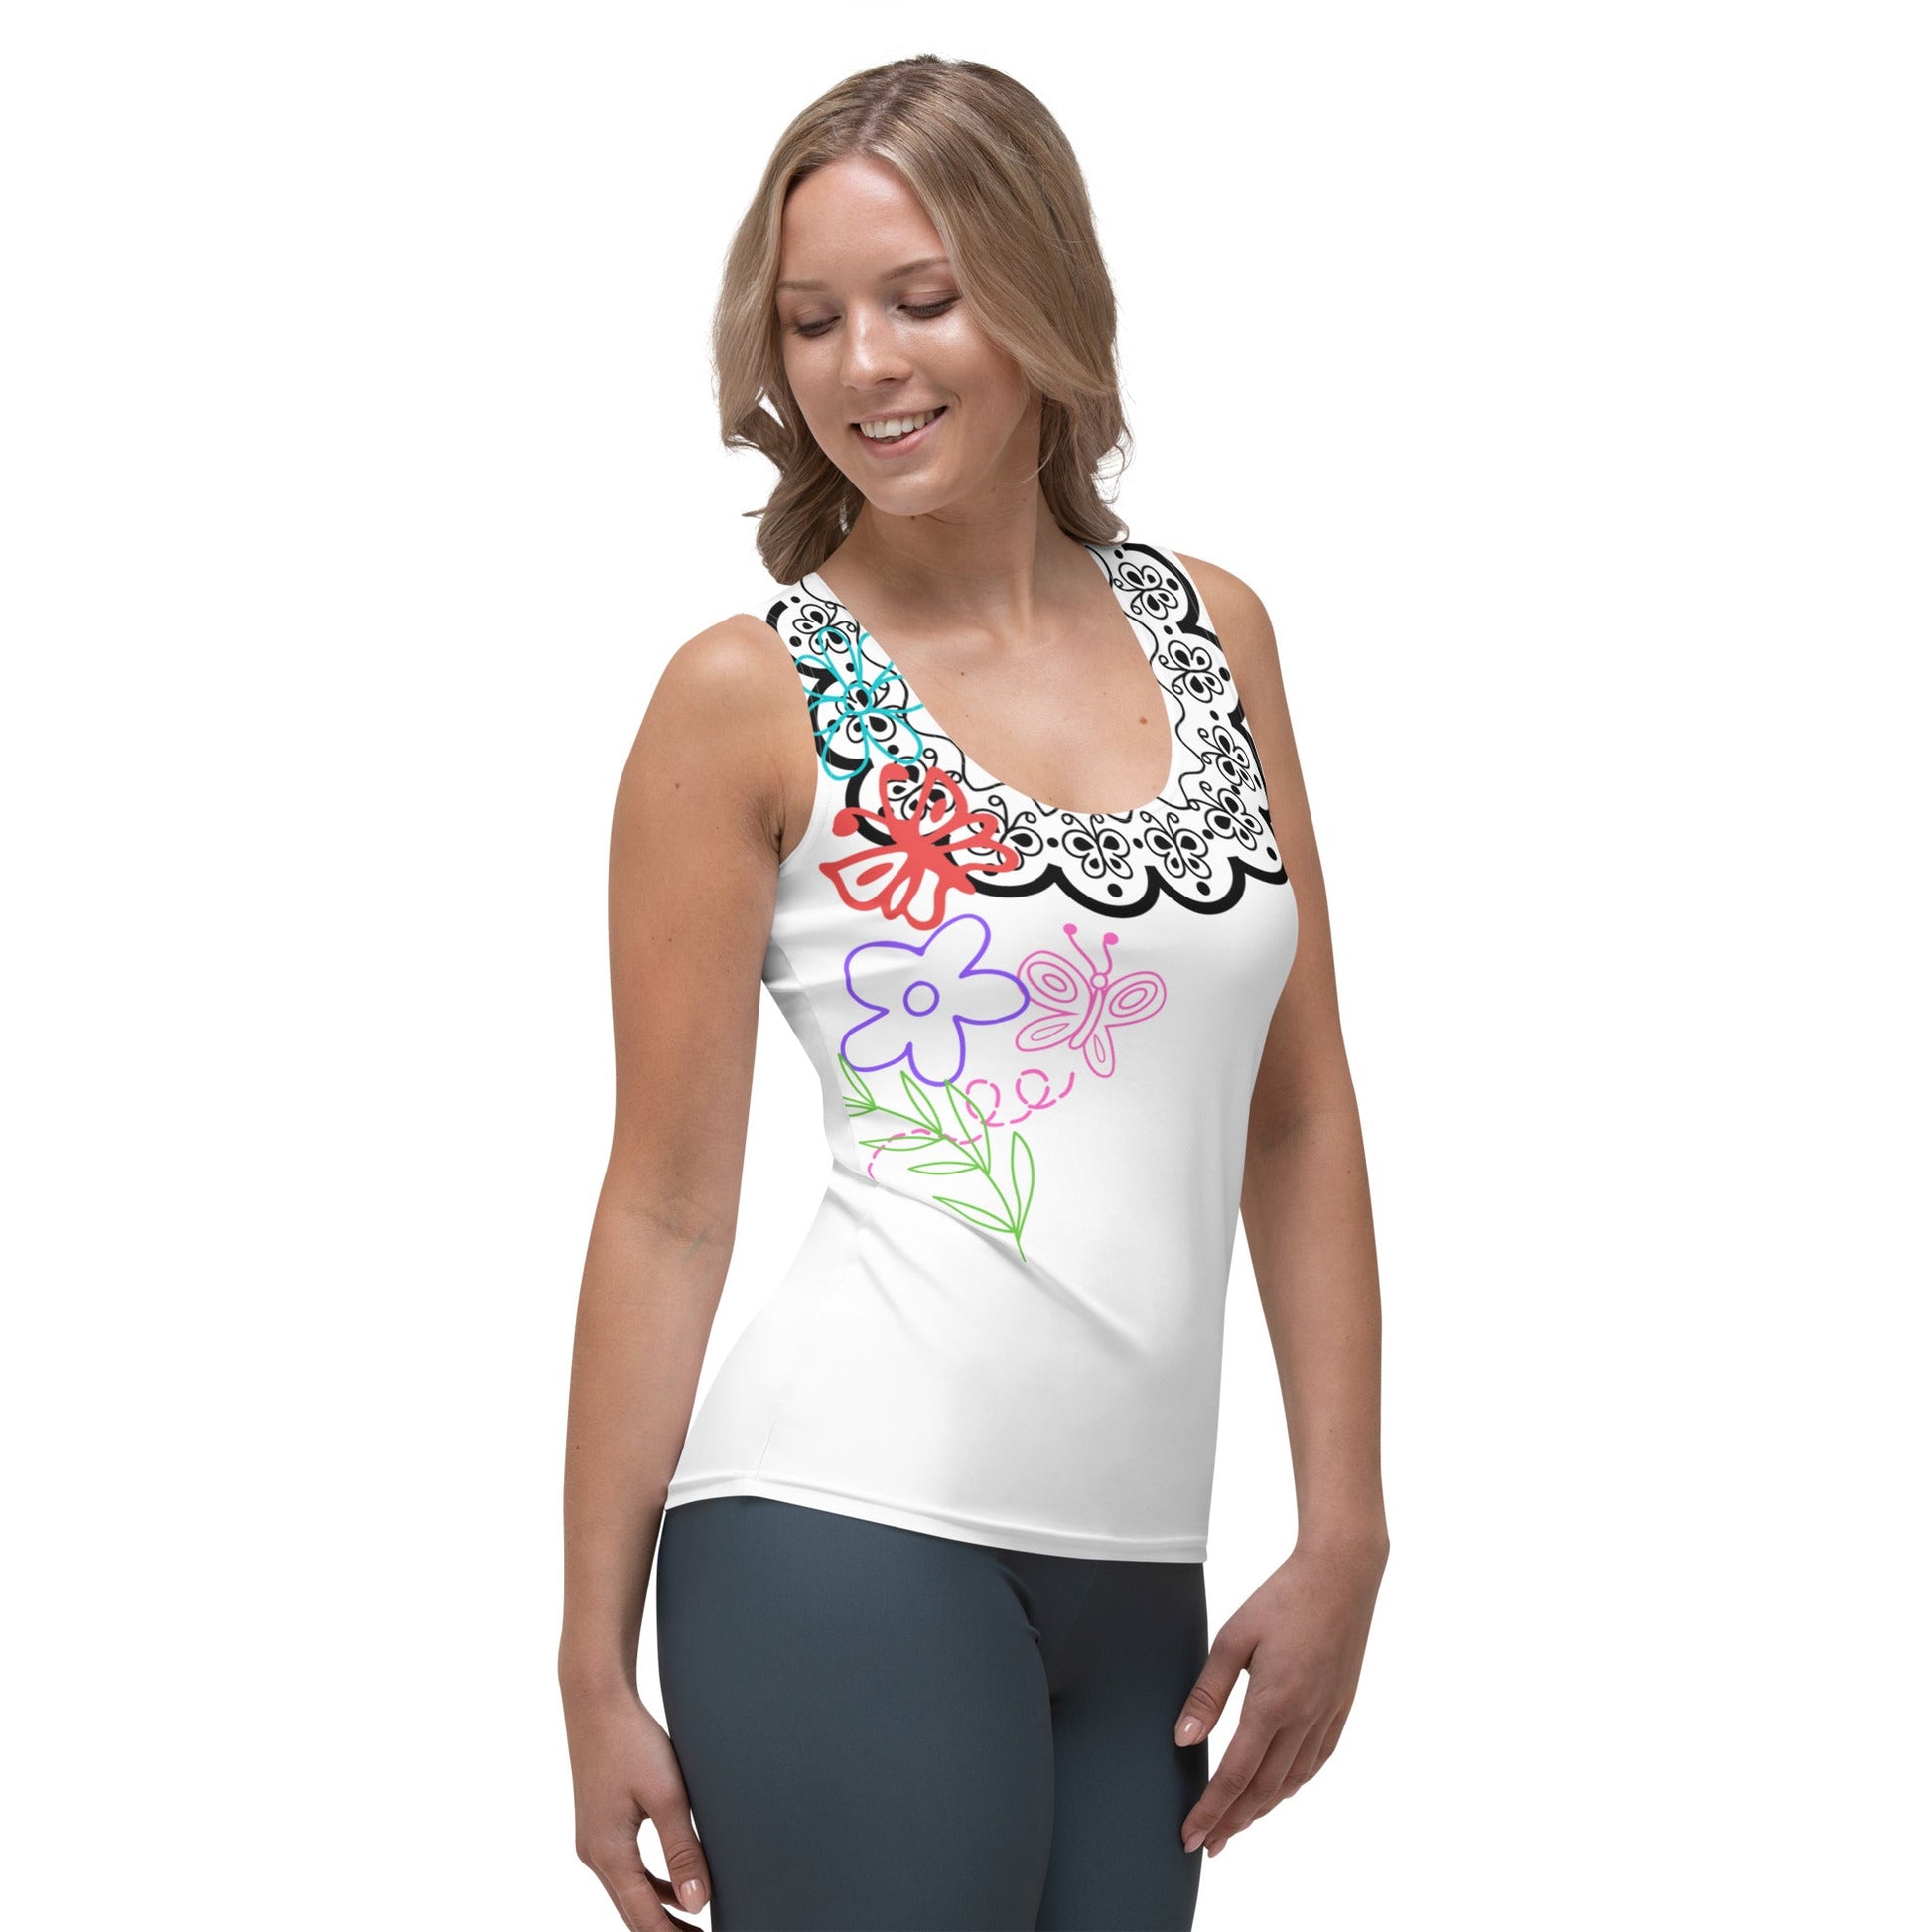 The Mirabel Tank Top active wearcosplayAdult T-ShirtLittle Lady Shay Boutique